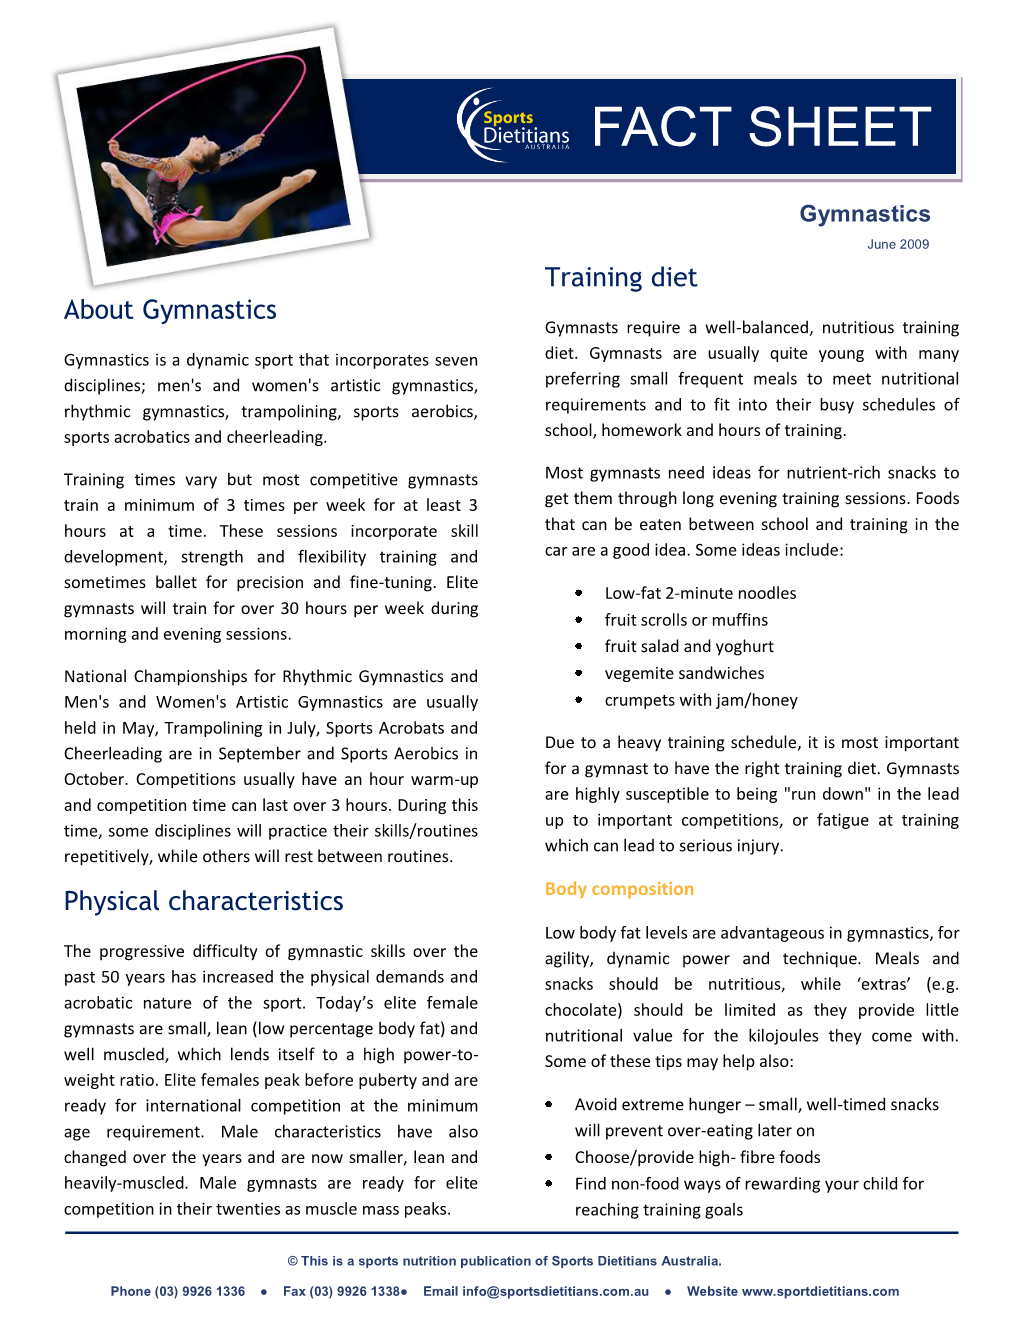 About Gymnastics Physical Characteristics Training Diet